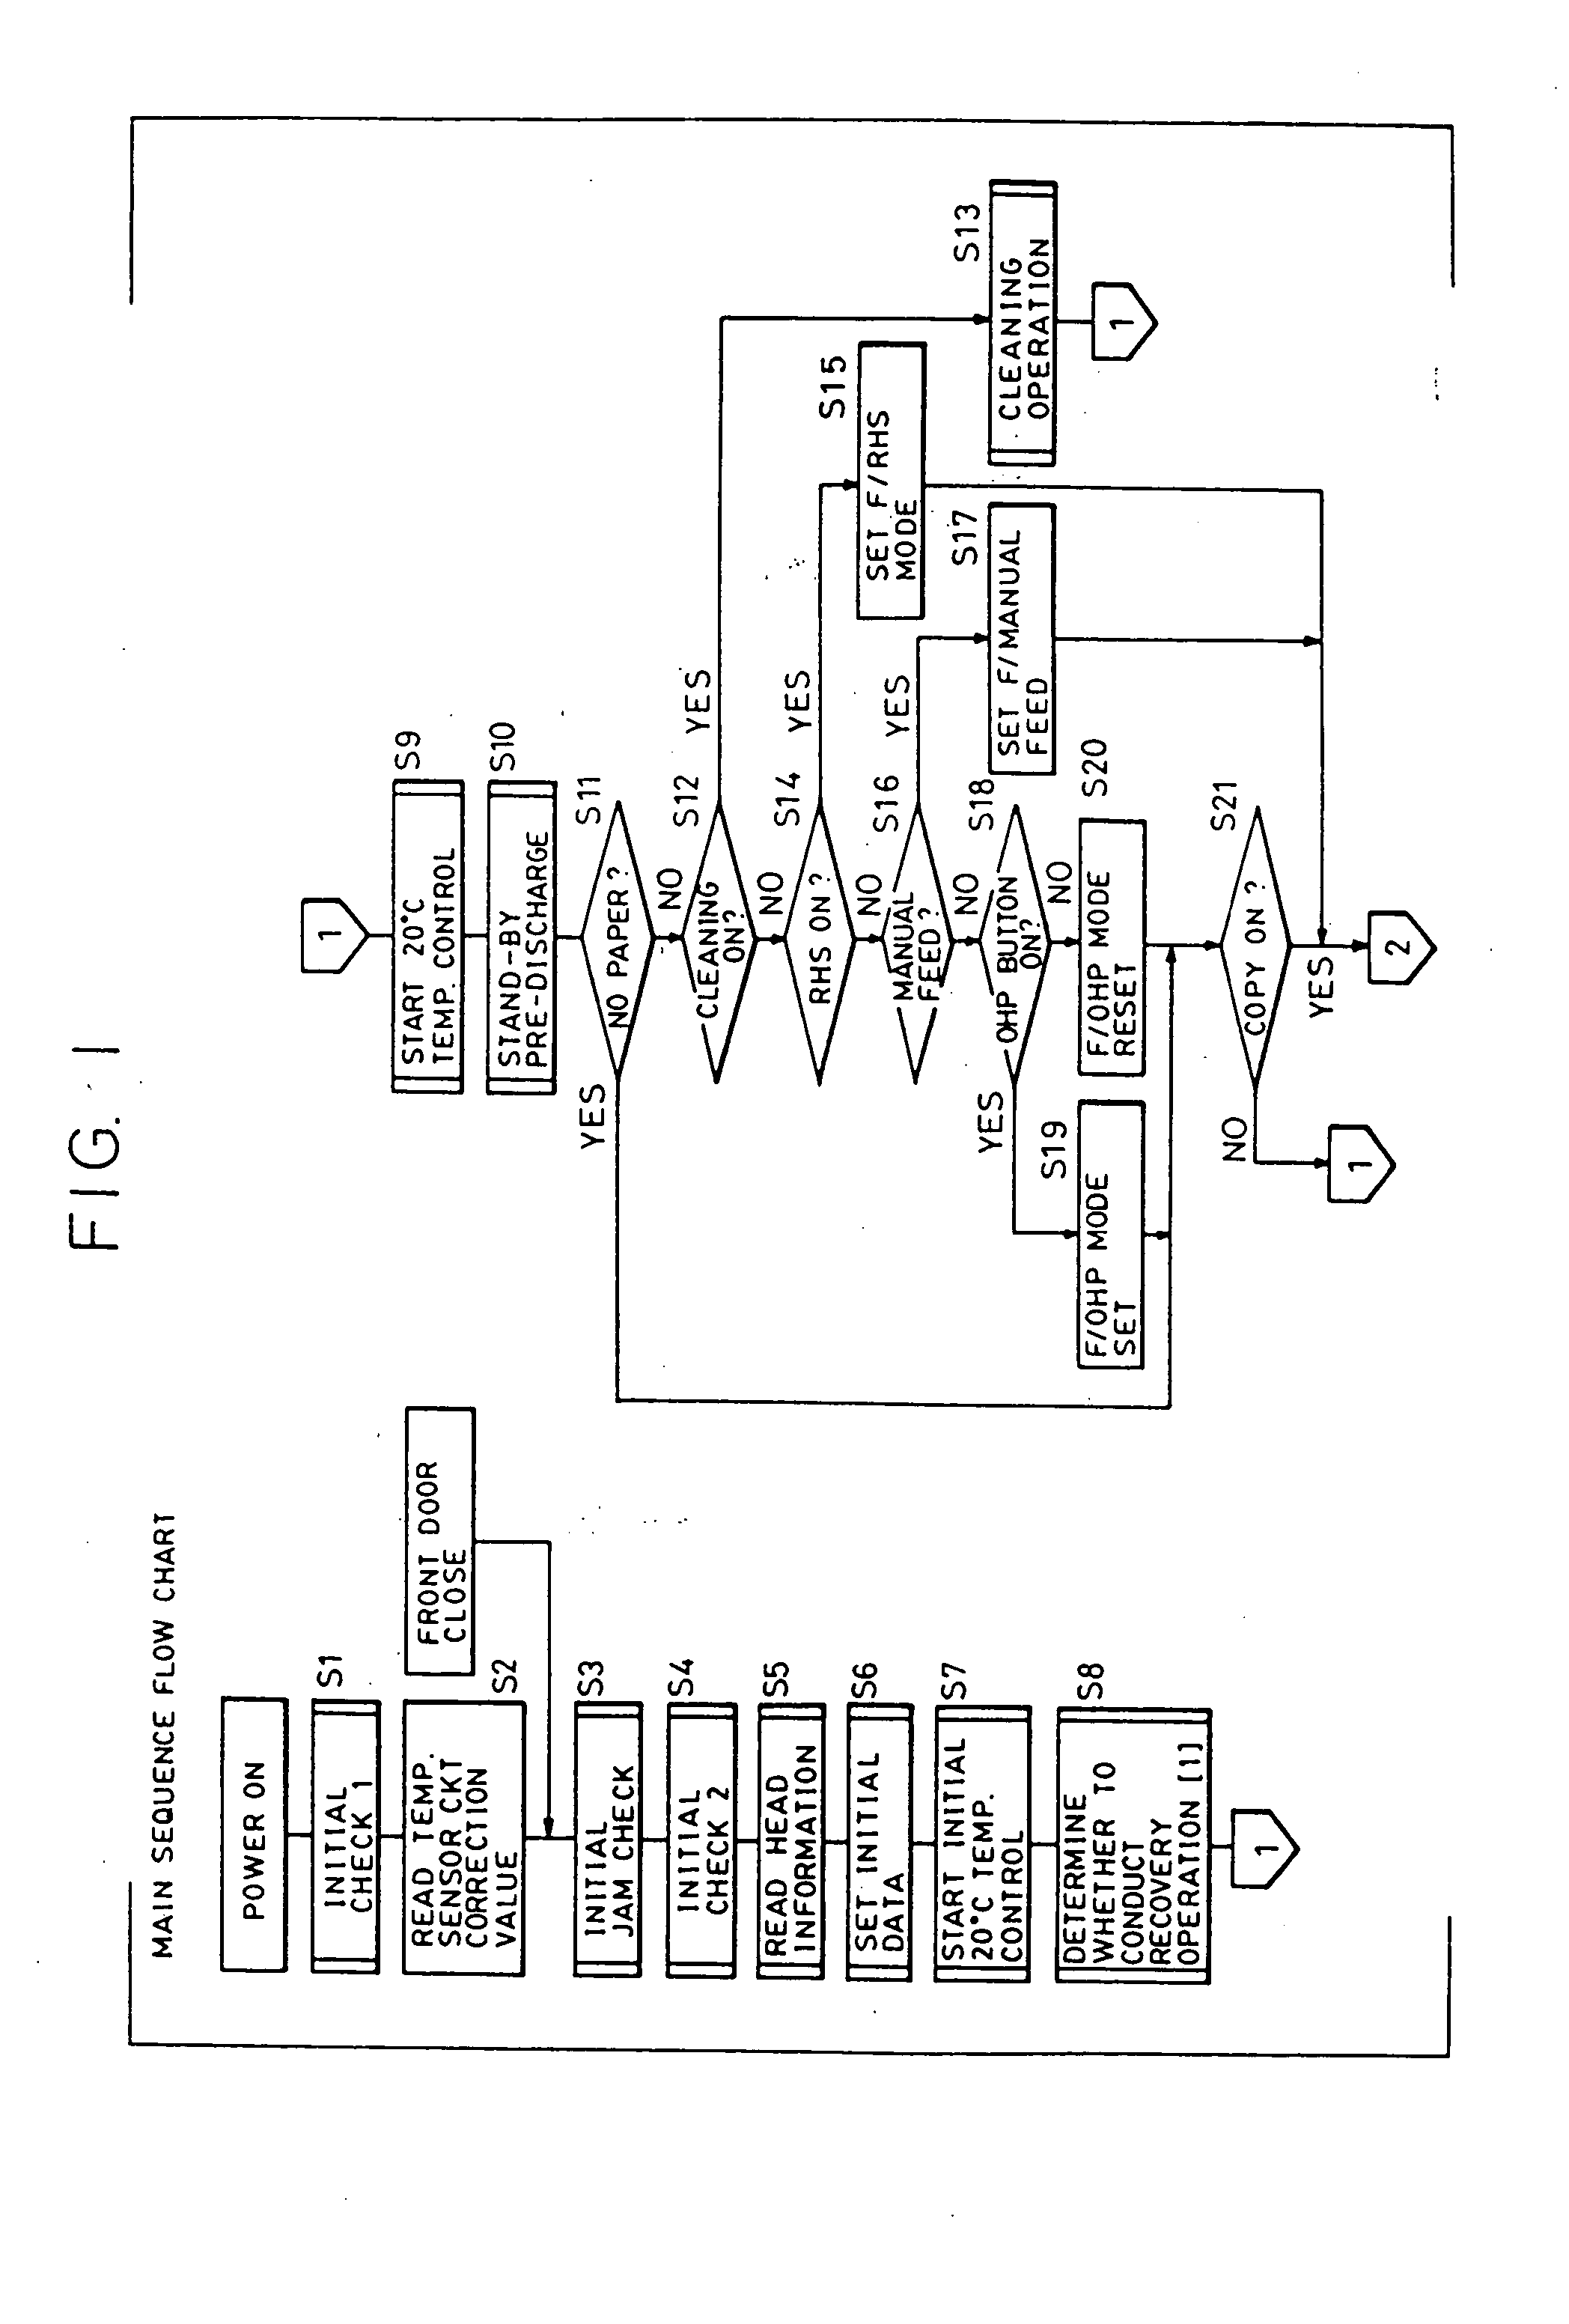 Ink jet recording apparatus and method using replaceable recording heads